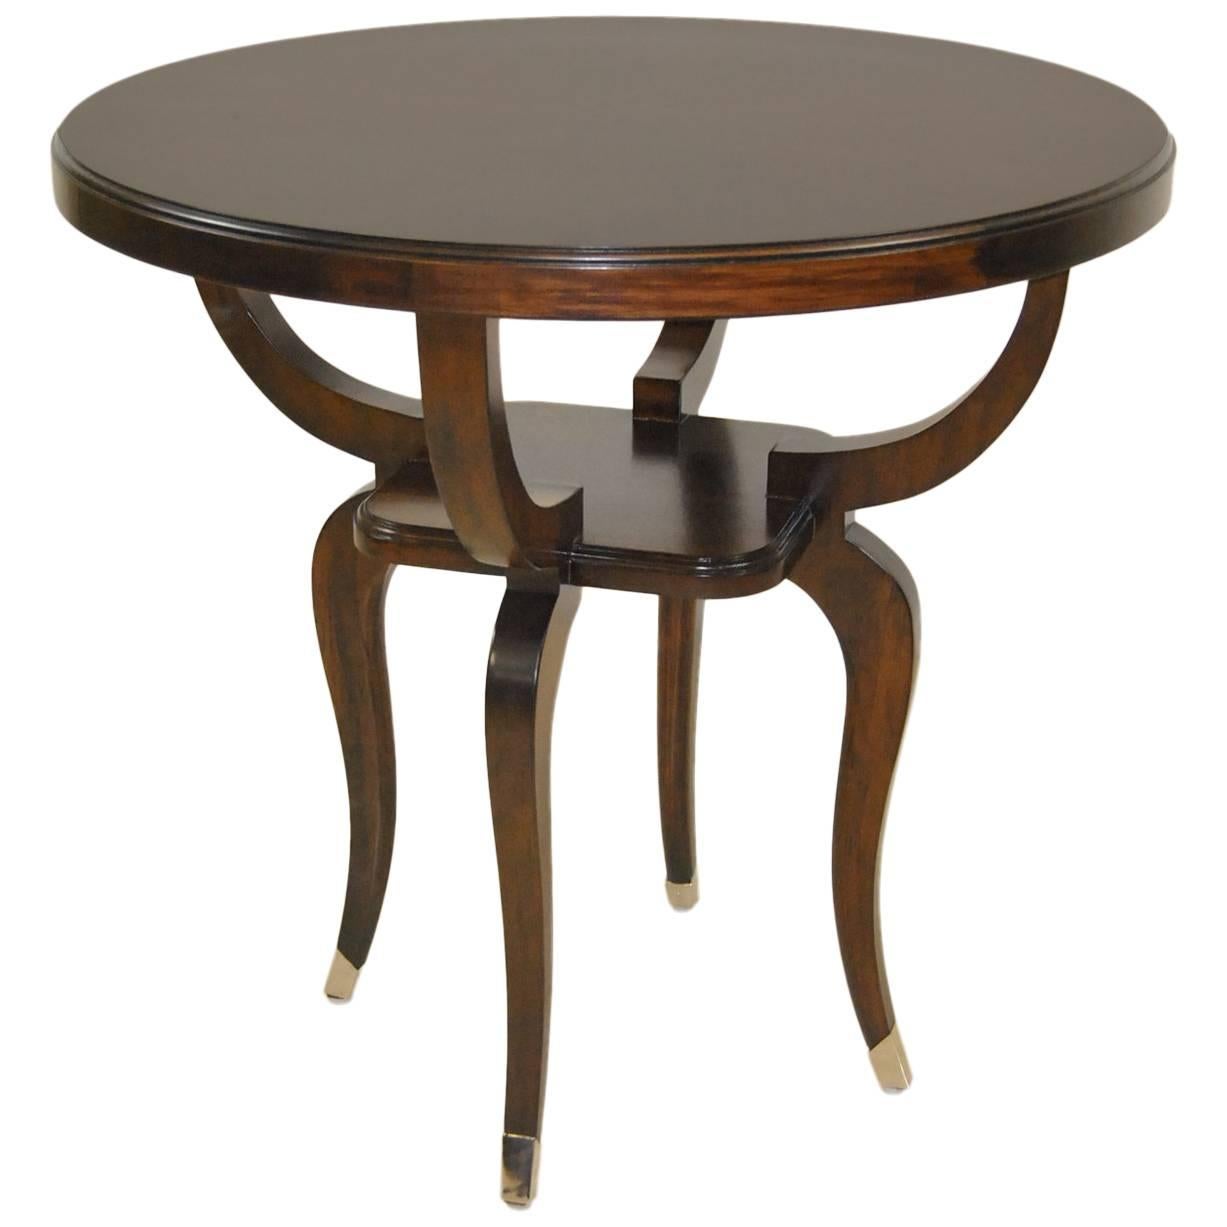 Walnut Parisian End Table with Inlaid Top by Robb & Stucky